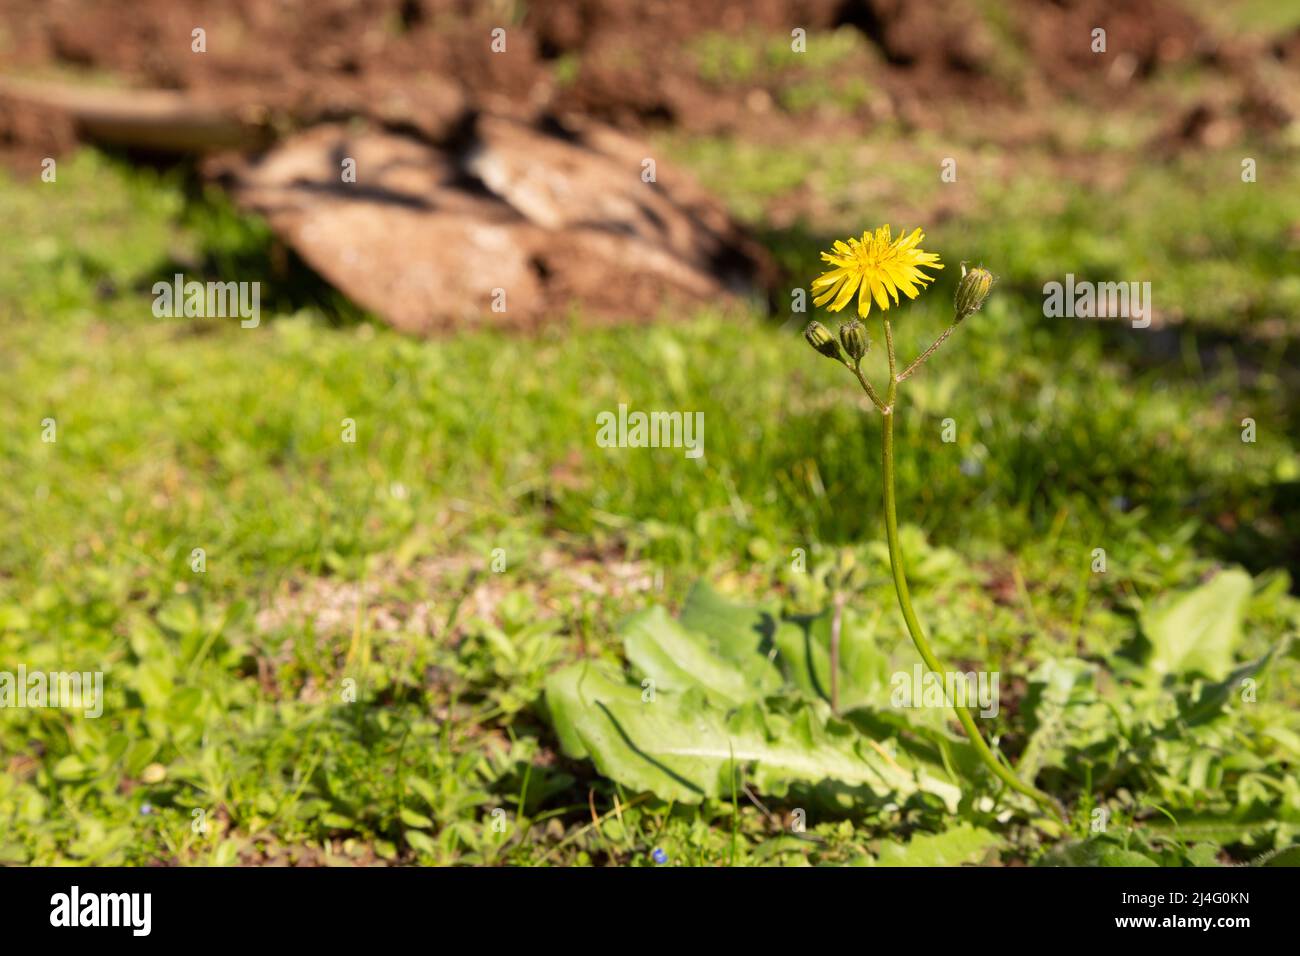 Background photo of dandelion flower and unopened buds in selective focus. Out of focus is dug soil, farming shovel and grass. Stock Photo